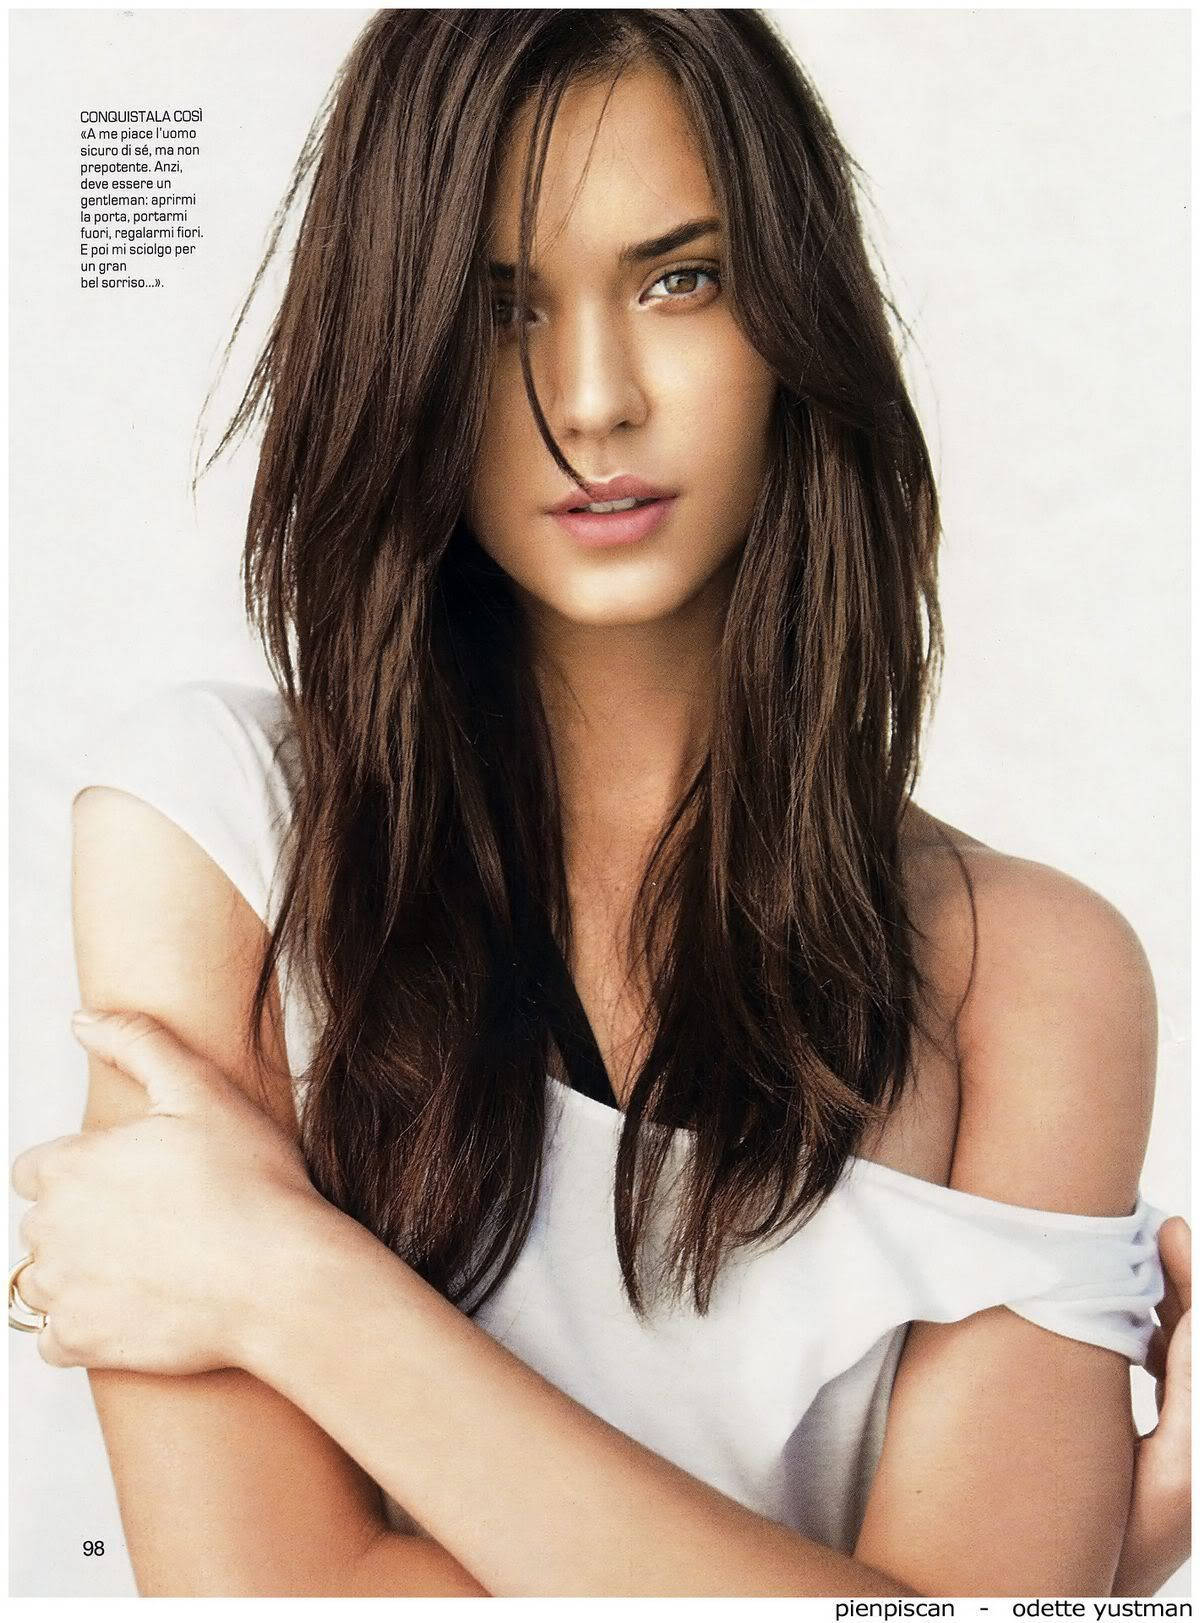 odette annable you again